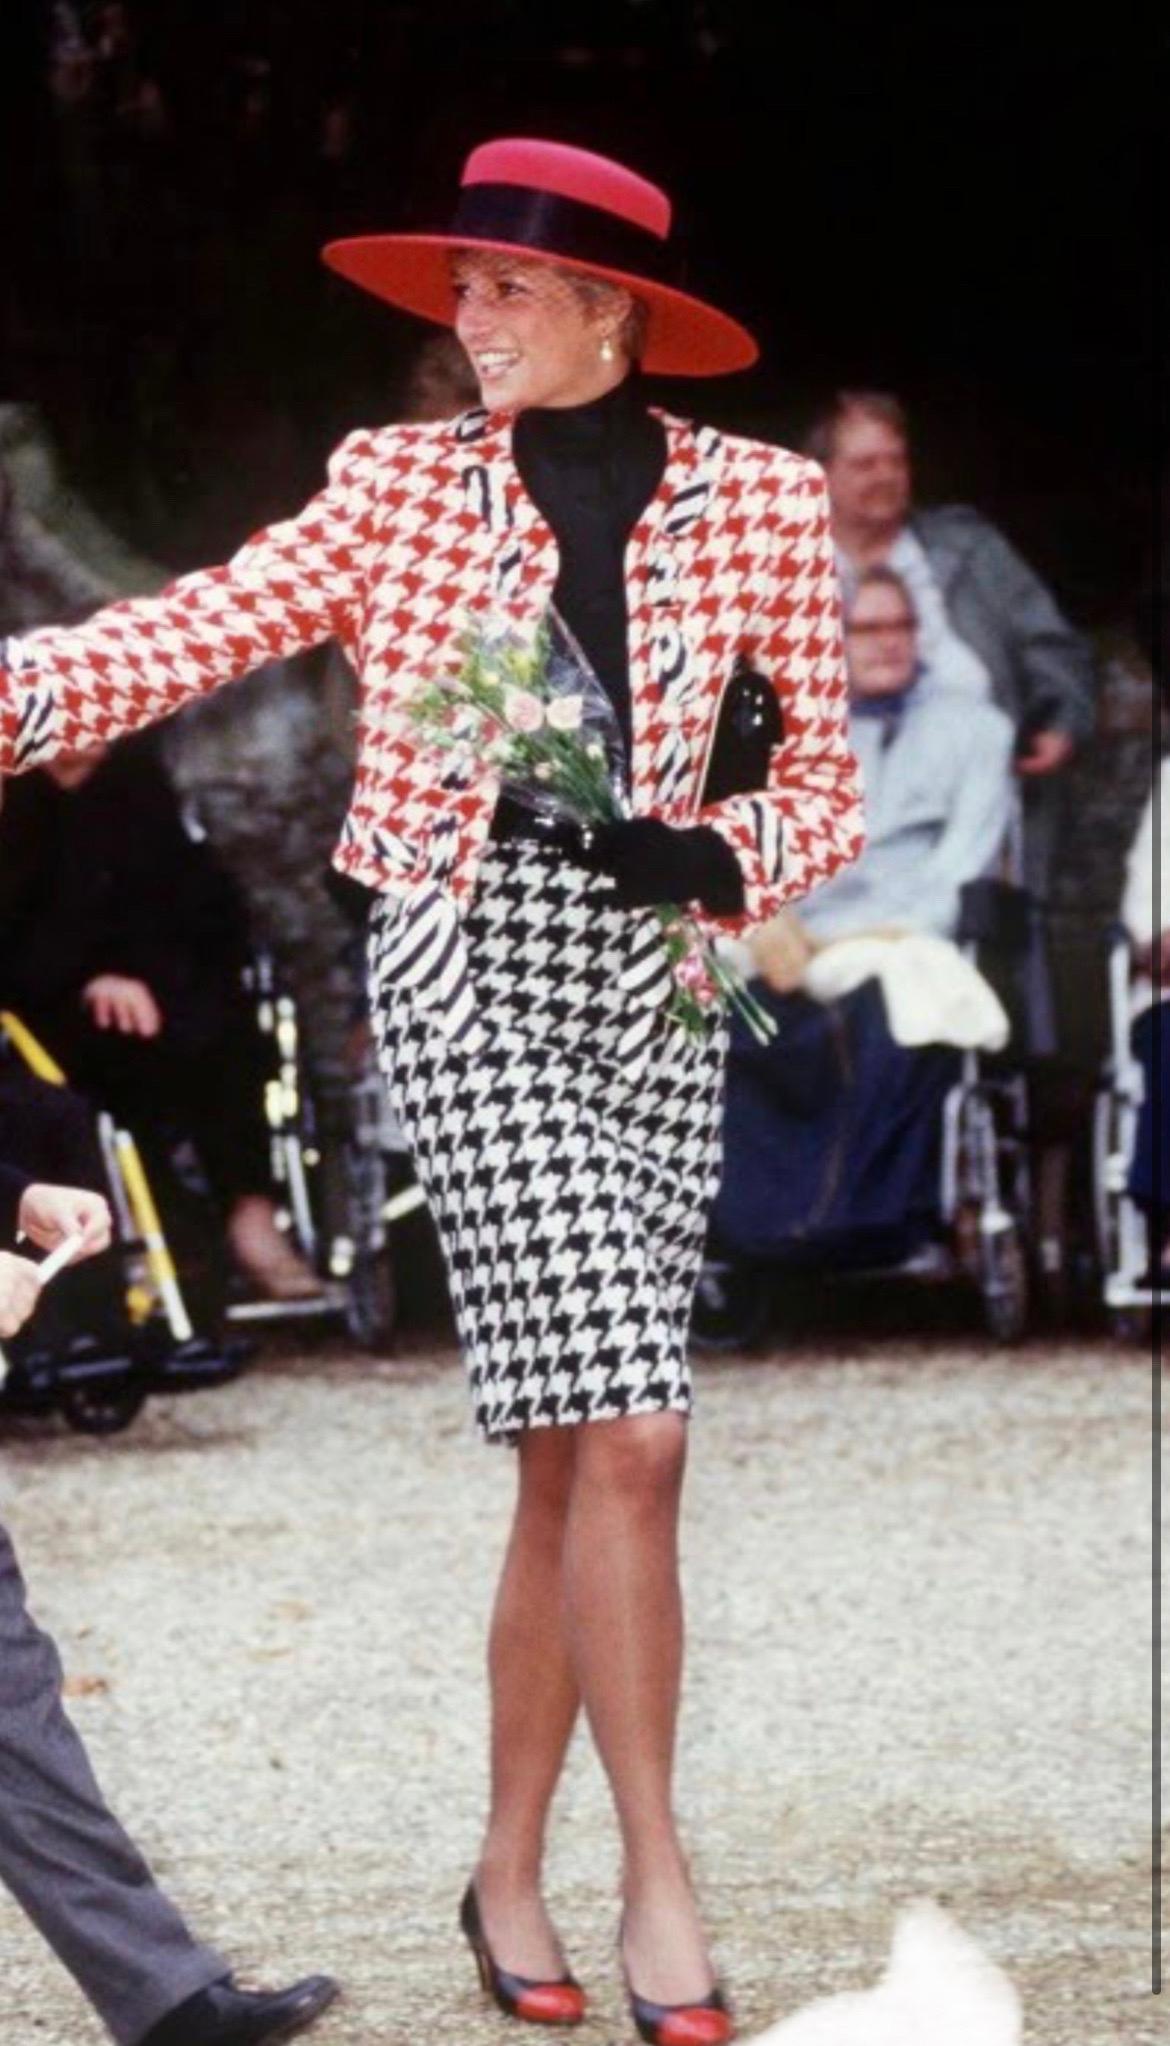 Moschino Cheap and Chic red and white houndstooth tweed scarf jacket from the early 1990's.
Featuring a classic timeless style this jacket can be worn for any occasion.
As famously seen on Princess Diana in 1990 and 1991.
Made in Italy.
Fully